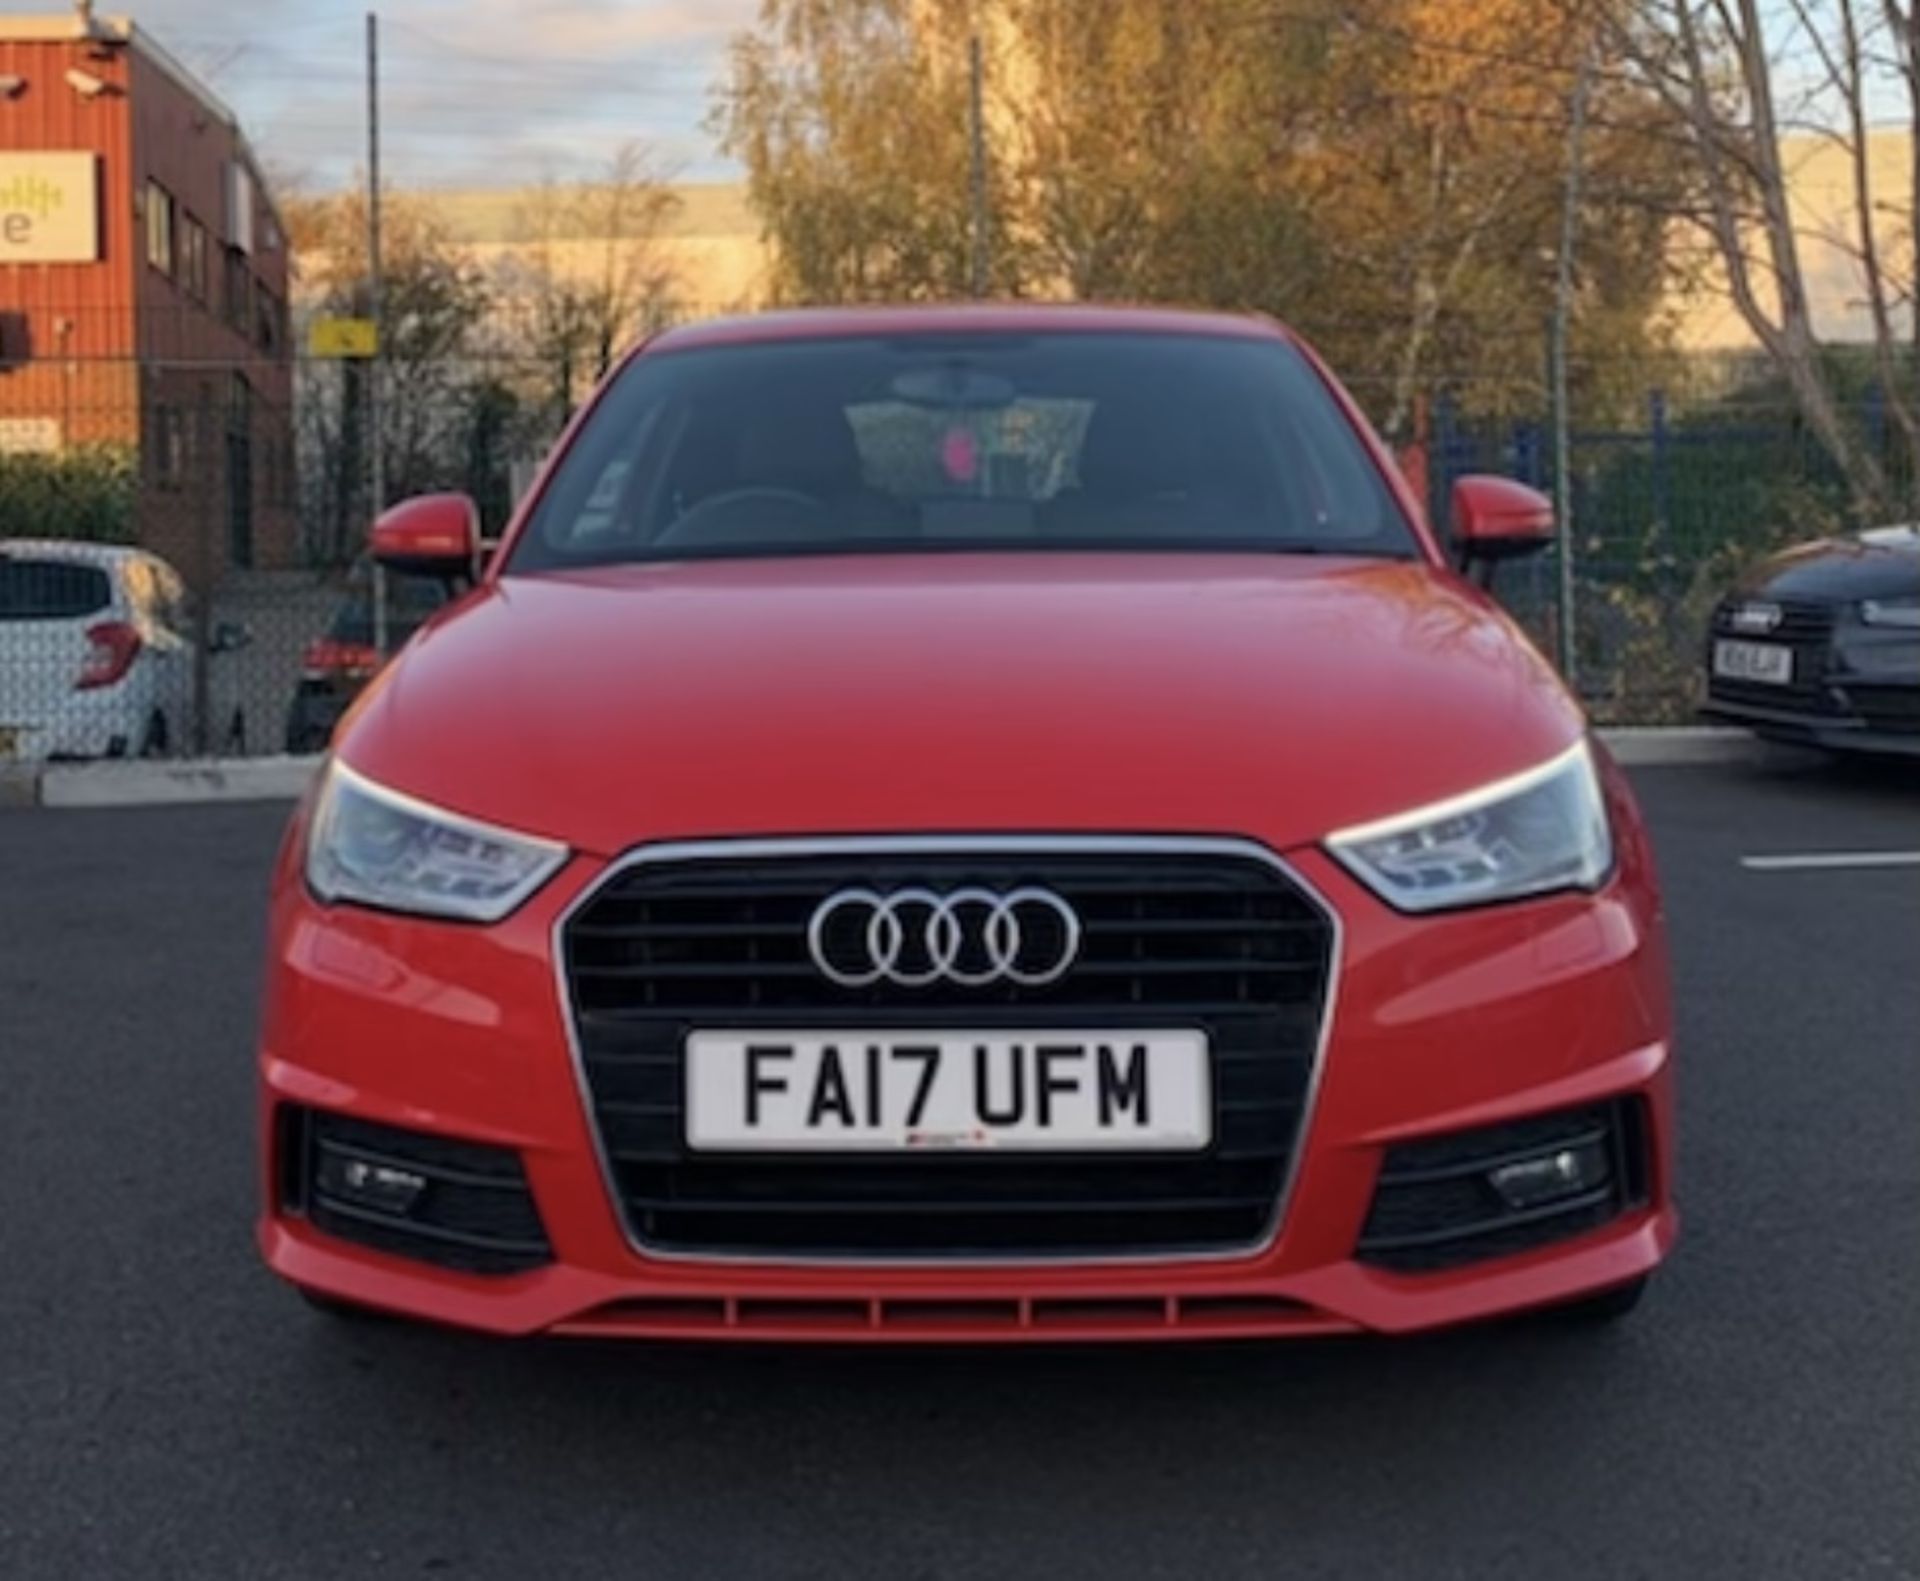 2017 AUDI A1 TDi S Line - SOLD WITH NO KNOWN FAULTS - Image 2 of 11